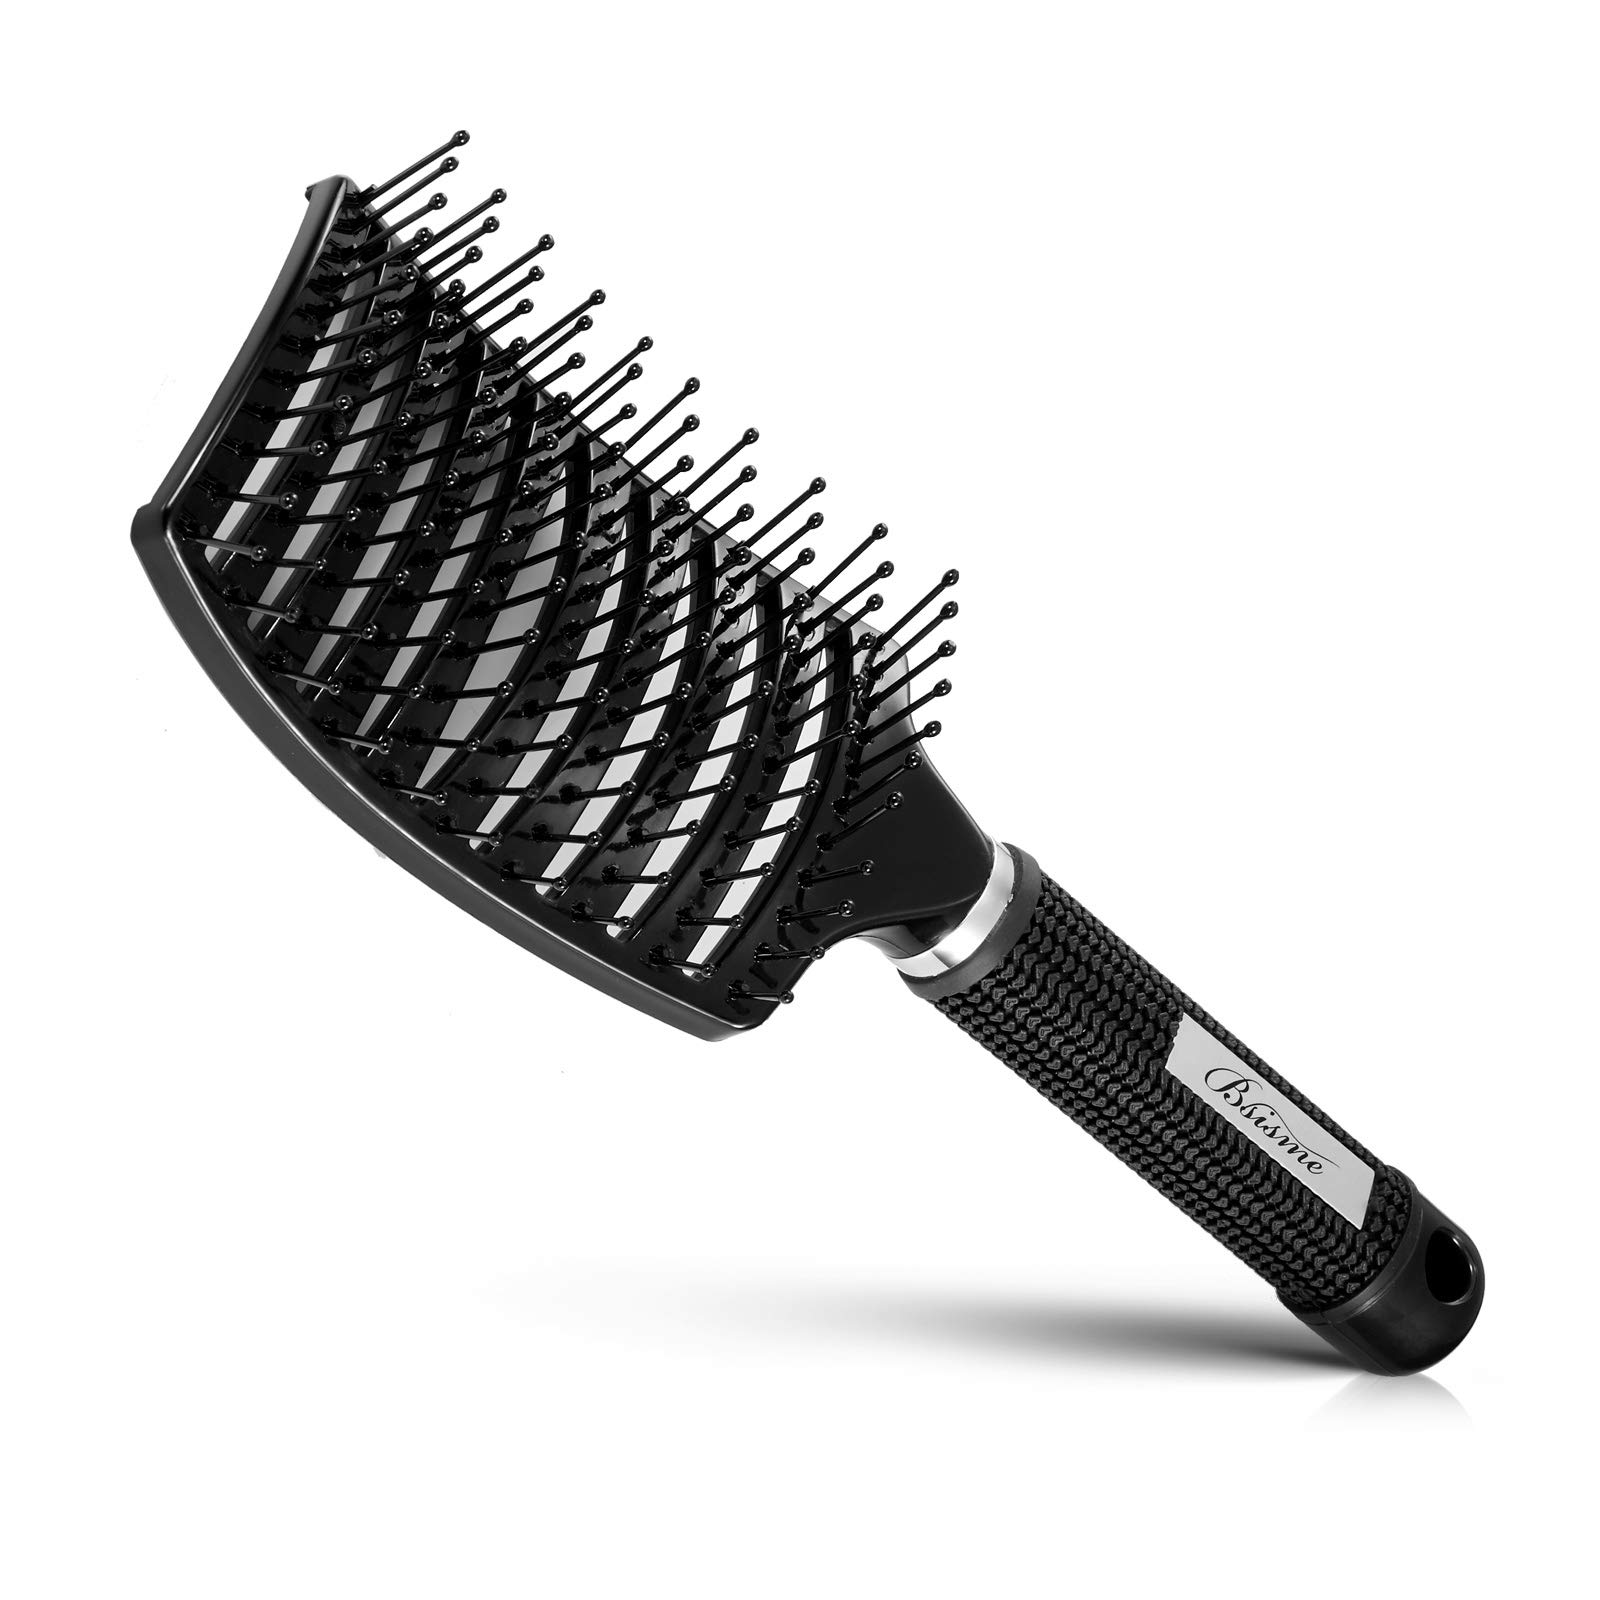 Hair Brush, Curved Vented Brush Faster Blow Drying, Professional Curved Vent Styling Hair Brushes for Women, Men, Paddle Detangling Brush for Wet Dry Curly Thick Straight Hair